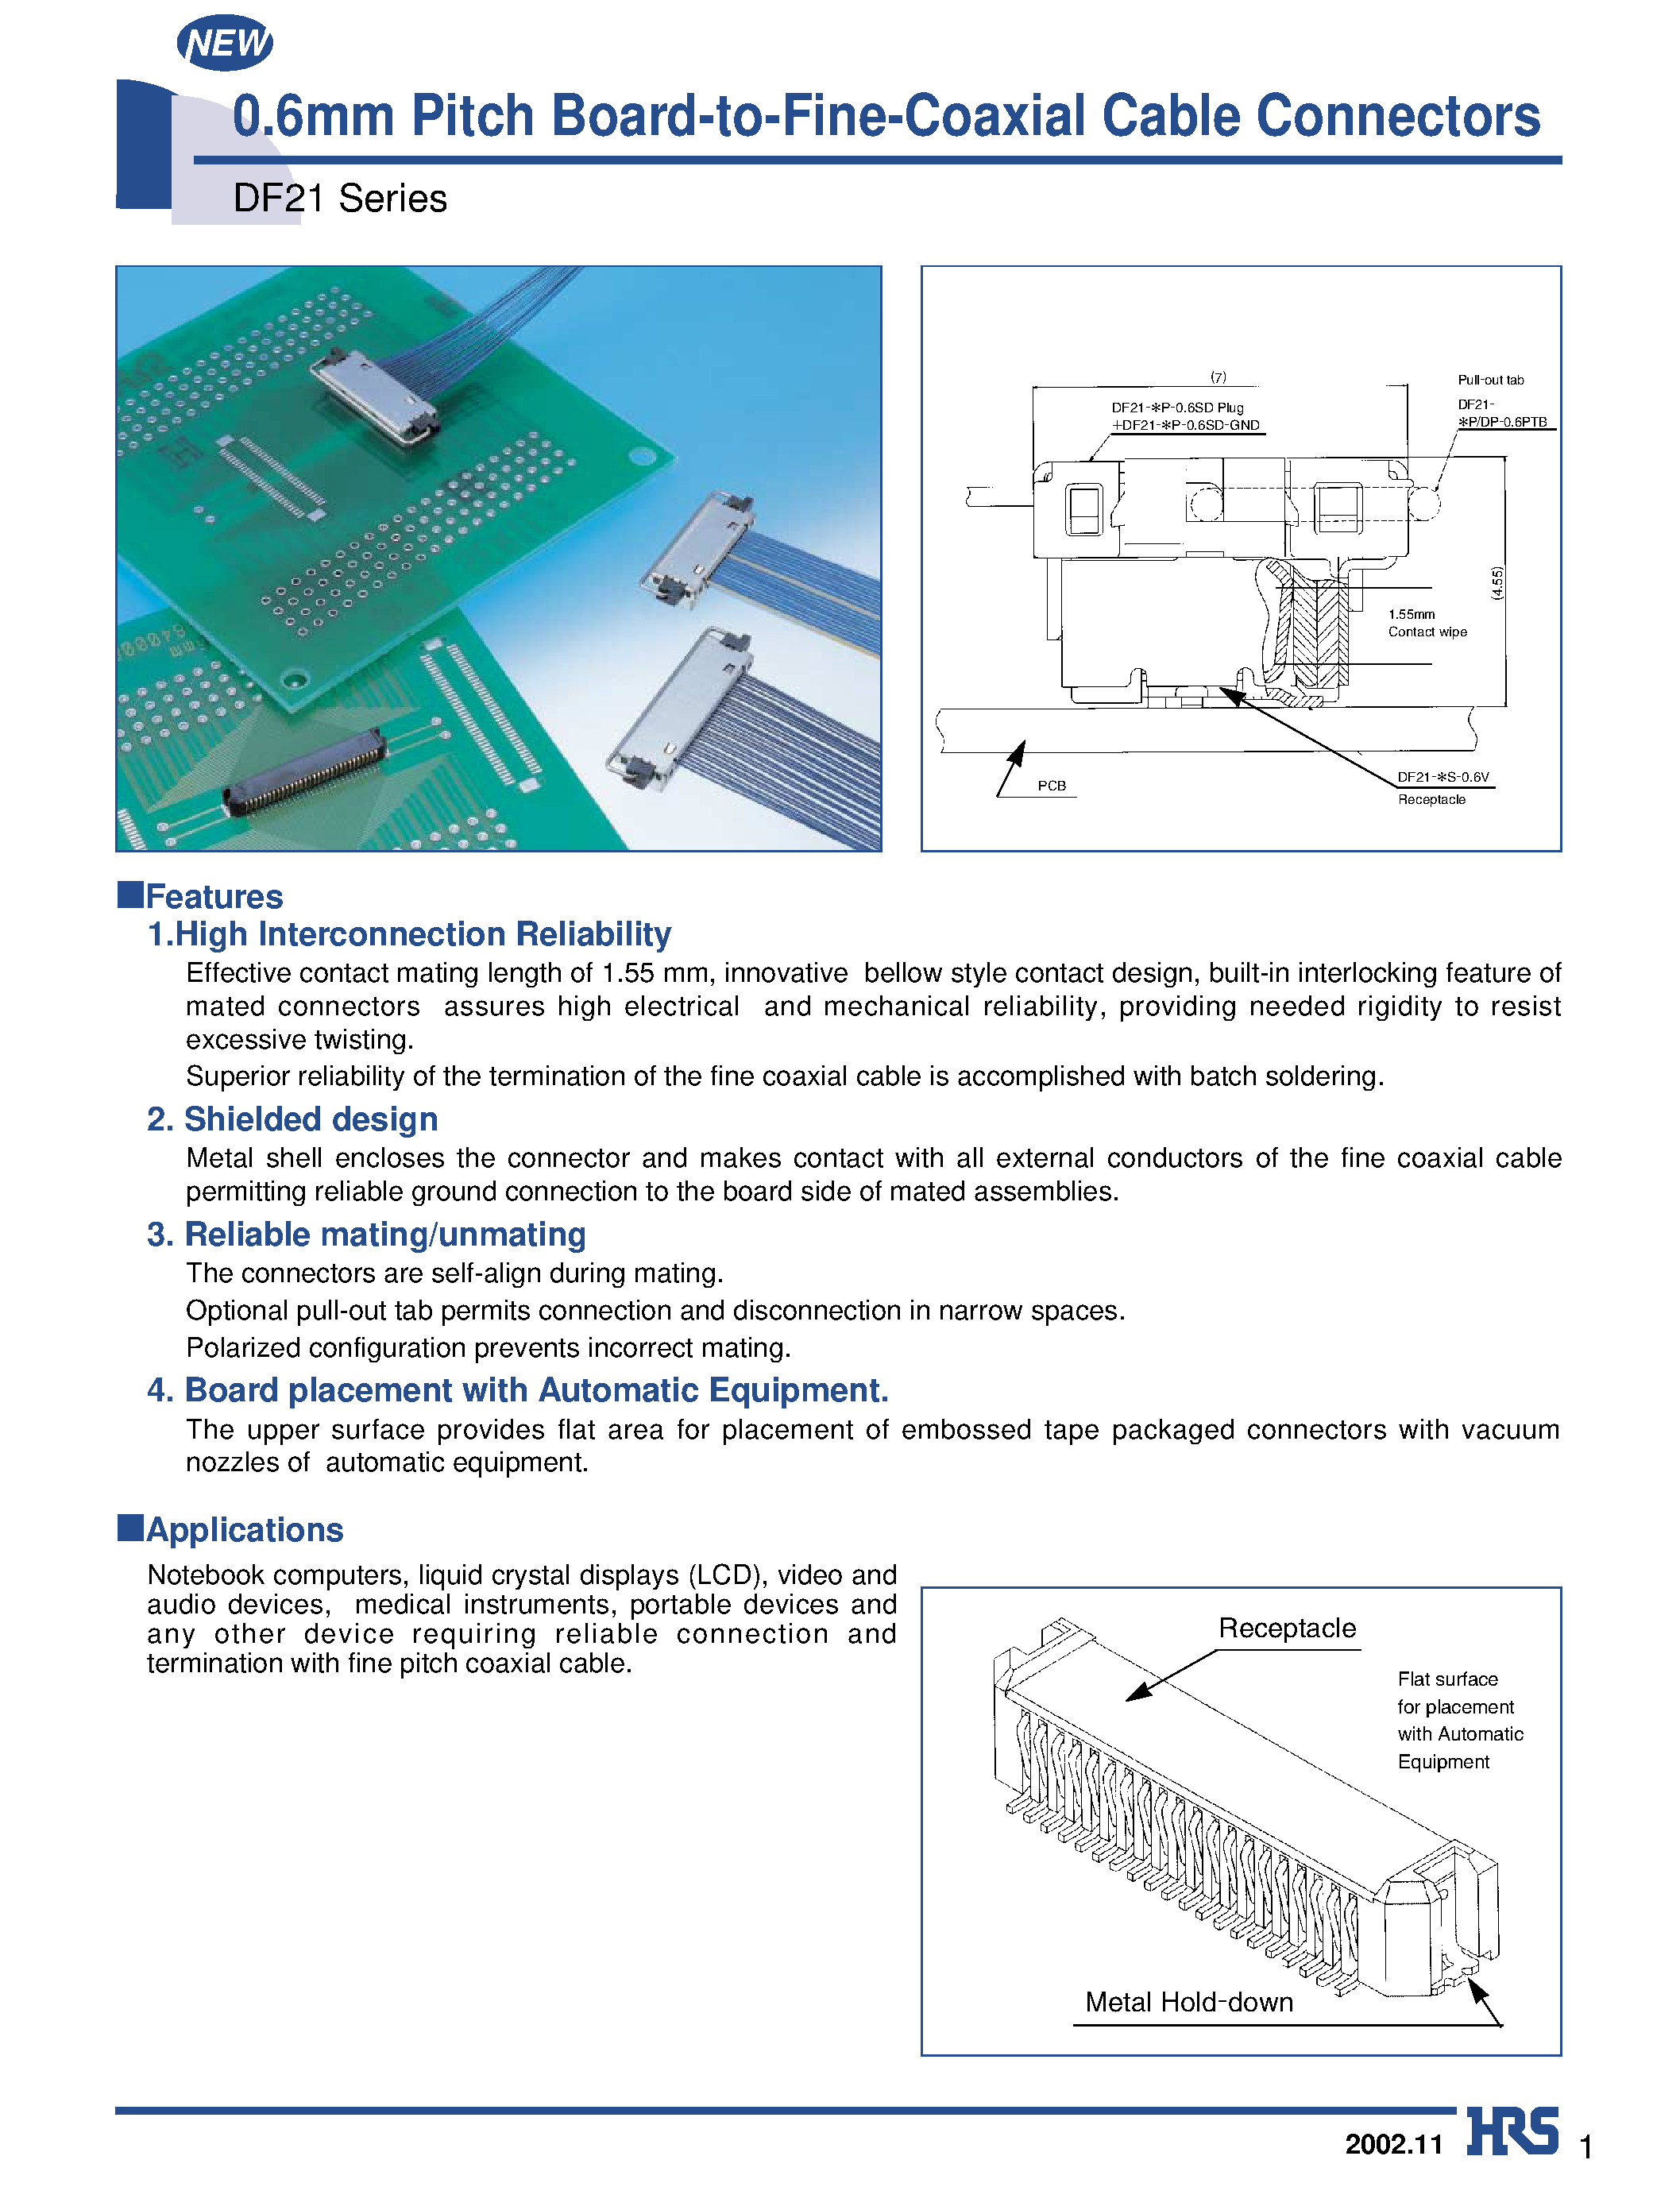 Datasheet DF21-20P-0.6SD - 0.6mm Pitch Board-to-Fine-Coaxial Cable Connectors page 1